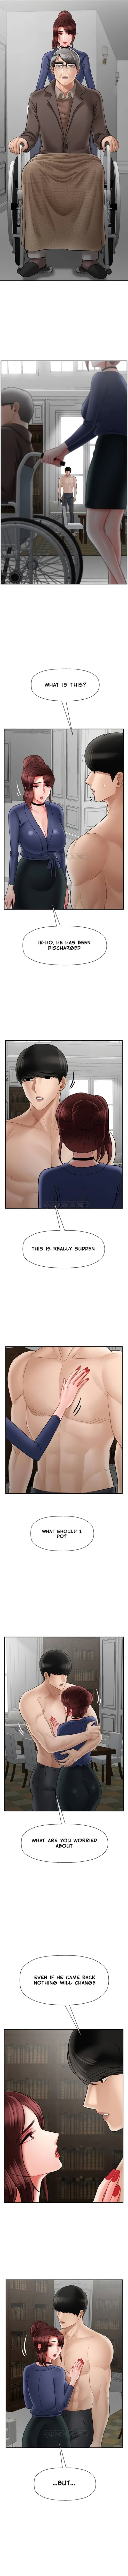 physical-classroom-chap-41-7